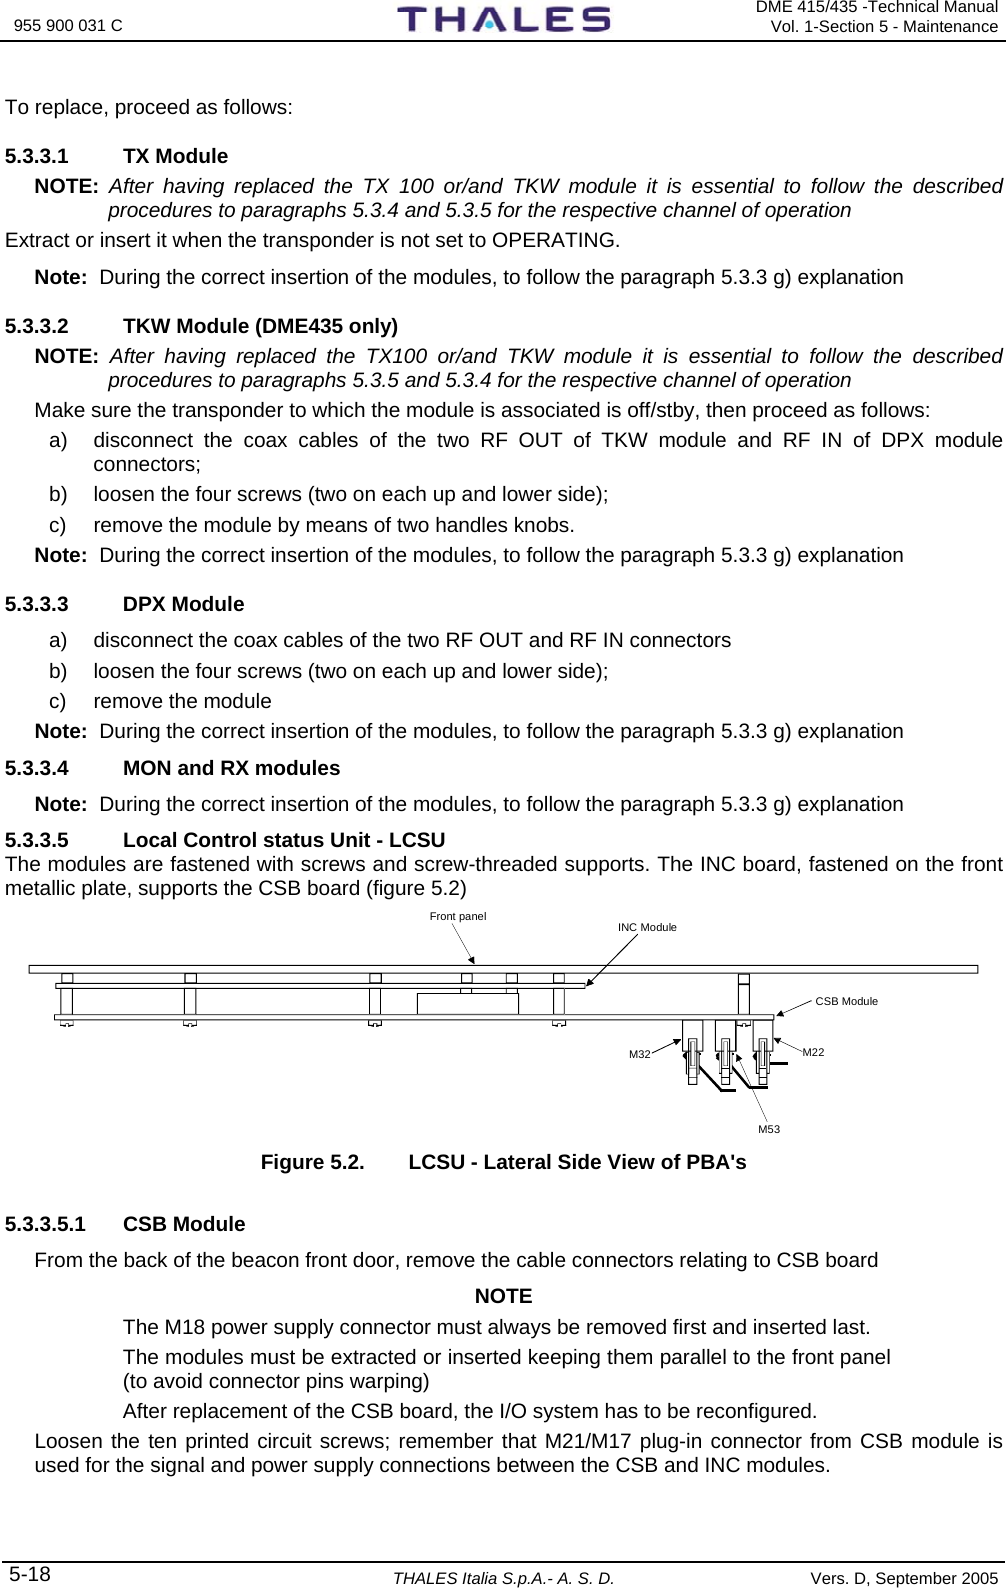  955 900 031 C   DME 415/435 -Technical ManualVol. 1-Section 5 - Maintenance 5-18 THALES Italia S.p.A.- A. S. D. Vers. D, September 2005 To replace, proceed as follows: 5.3.3.1 TX Module NOTE:  After having replaced the TX 100 or/and TKW module it is essential to follow the described procedures to paragraphs 5.3.4 and 5.3.5 for the respective channel of operation Extract or insert it when the transponder is not set to OPERATING.  Note:  During the correct insertion of the modules, to follow the paragraph 5.3.3 g) explanation 5.3.3.2  TKW Module (DME435 only) NOTE:  After having replaced the TX100 or/and TKW module it is essential to follow the described procedures to paragraphs 5.3.5 and 5.3.4 for the respective channel of operation Make sure the transponder to which the module is associated is off/stby, then proceed as follows: a)  disconnect the coax cables of the two RF OUT of TKW module and RF IN of DPX module connectors; b)  loosen the four screws (two on each up and lower side); c)  remove the module by means of two handles knobs. Note:  During the correct insertion of the modules, to follow the paragraph 5.3.3 g) explanation 5.3.3.3 DPX Module a)  disconnect the coax cables of the two RF OUT and RF IN connectors b)  loosen the four screws (two on each up and lower side); c)  remove the module Note:  During the correct insertion of the modules, to follow the paragraph 5.3.3 g) explanation 5.3.3.4  MON and RX modules Note:  During the correct insertion of the modules, to follow the paragraph 5.3.3 g) explanation 5.3.3.5  Local Control status Unit - LCSU  The modules are fastened with screws and screw-threaded supports. The INC board, fastened on the front metallic plate, supports the CSB board (figure 5.2) CSB ModuleINC ModuleM32M53M22Front panel Figure 5.2.  LCSU - Lateral Side View of PBA&apos;s 5.3.3.5.1 CSB Module From the back of the beacon front door, remove the cable connectors relating to CSB board  NOTE The M18 power supply connector must always be removed first and inserted last.  The modules must be extracted or inserted keeping them parallel to the front panel (to avoid connector pins warping) After replacement of the CSB board, the I/O system has to be reconfigured. Loosen the ten printed circuit screws; remember that M21/M17 plug-in connector from CSB module is used for the signal and power supply connections between the CSB and INC modules. 